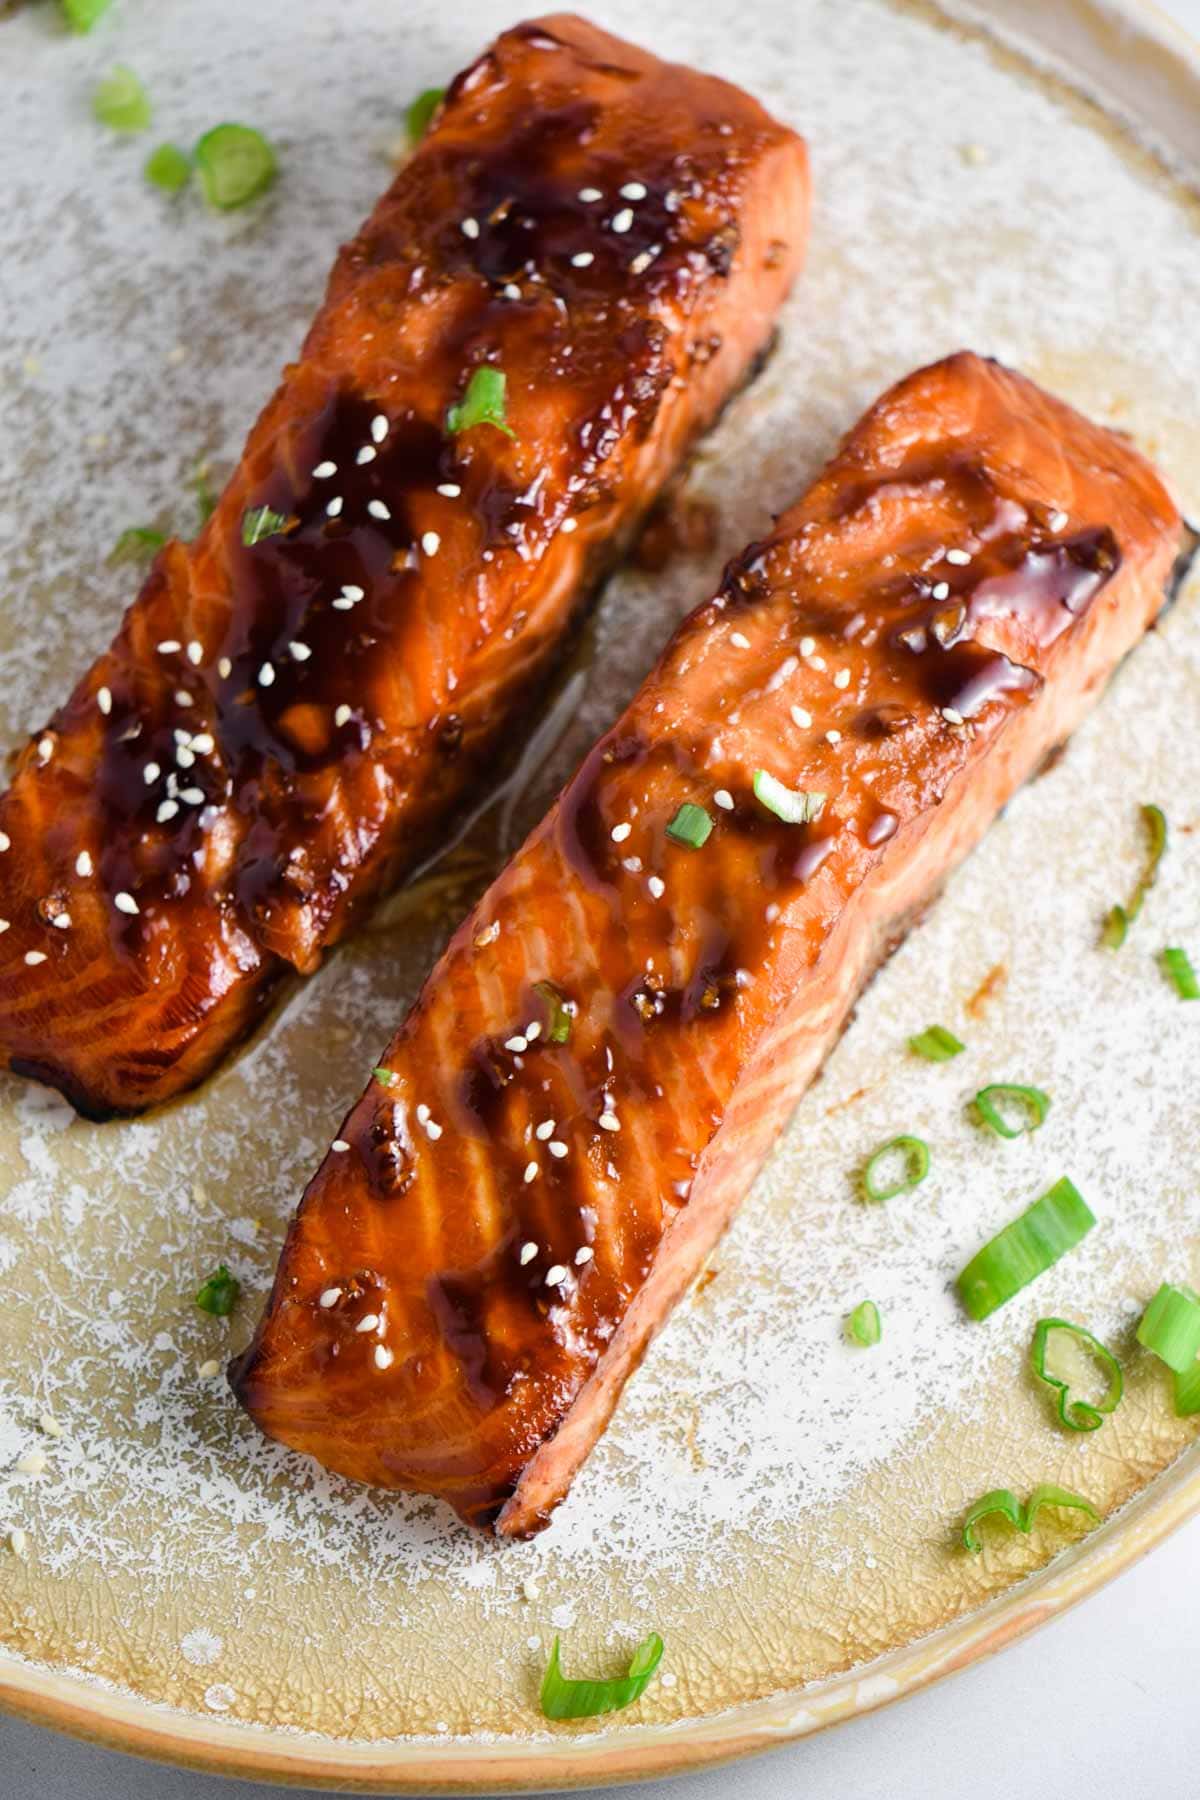 Two glazed teriyaki salmon on a plate sprinkled with green onions.